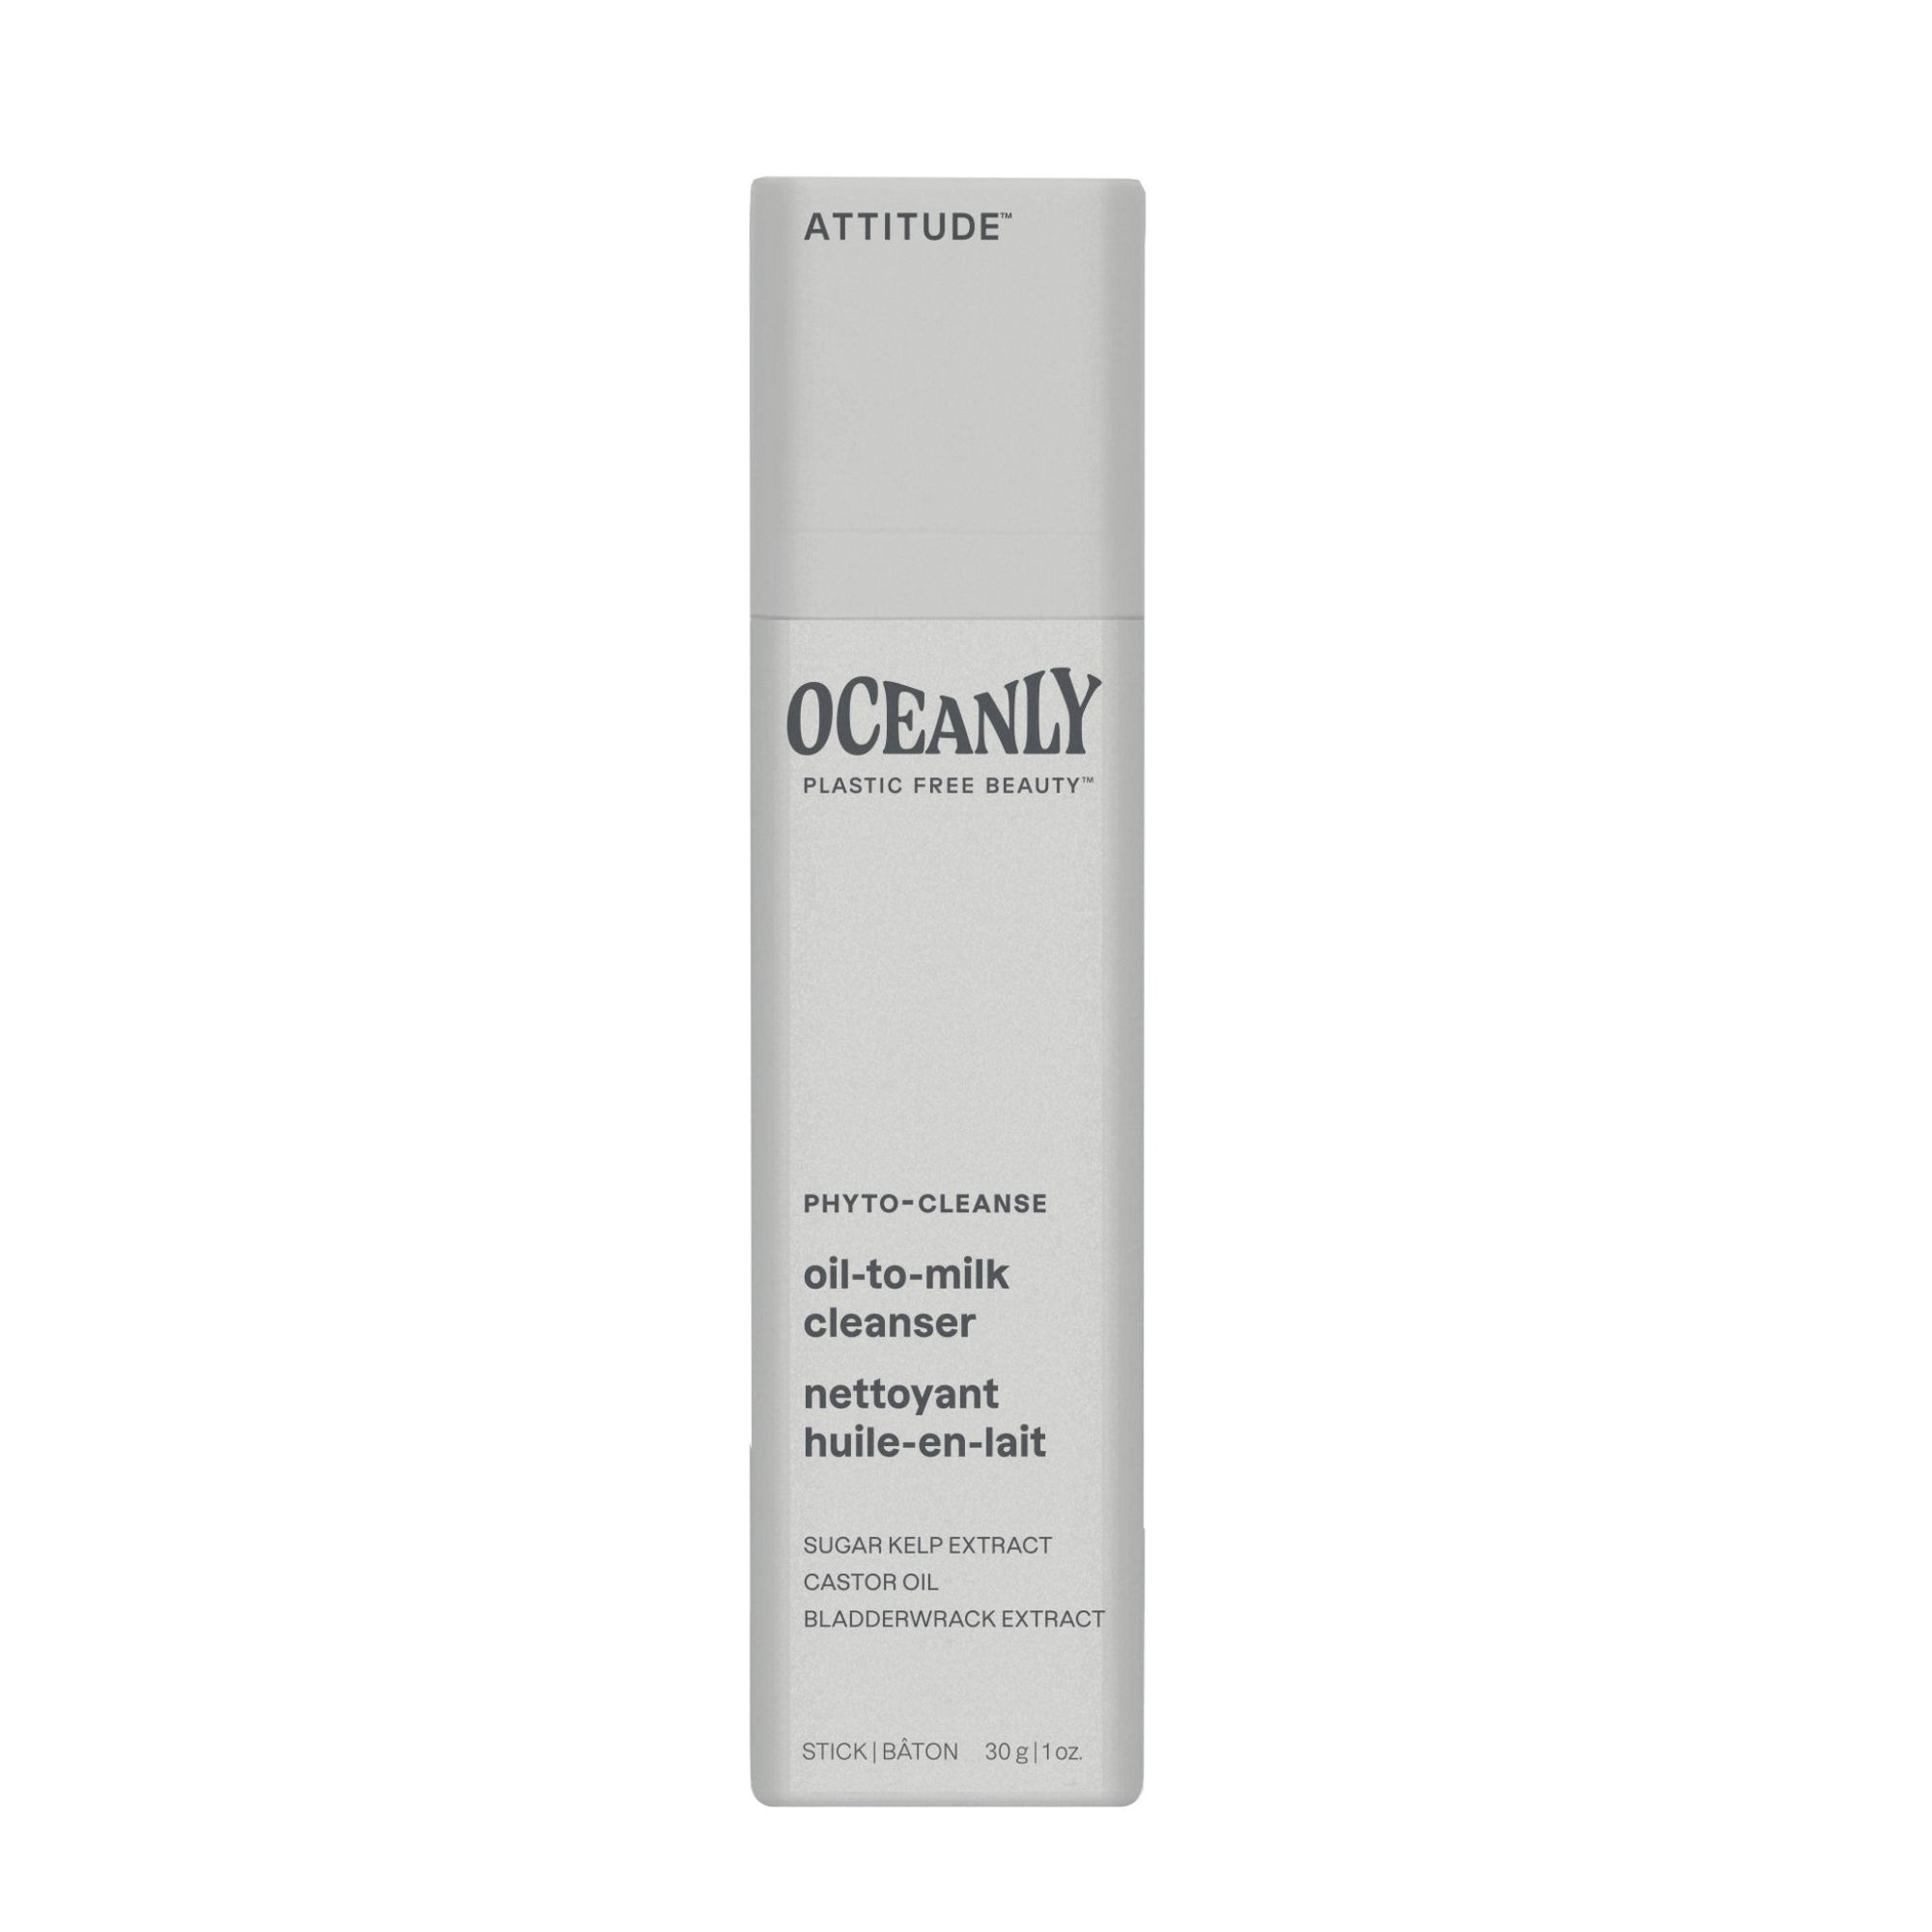 Attitude Oceanly Phyto-Clean Oil-to-Milk Cleanser 30g